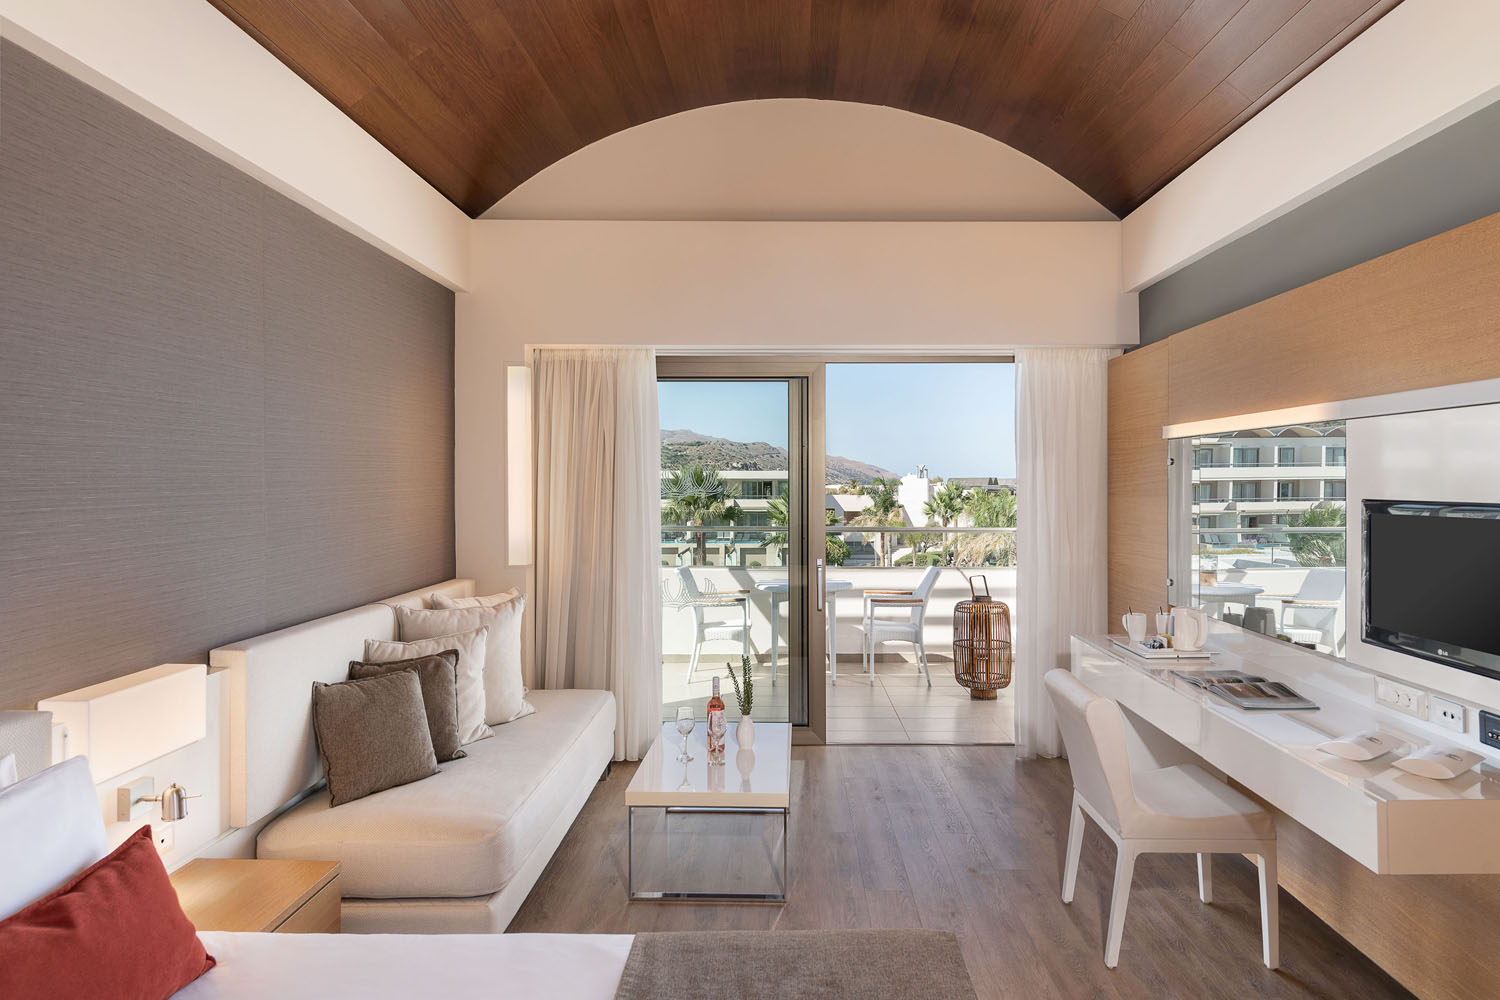 Deluxe Suite with Pool View, Avra Imperial Hotel, Crete